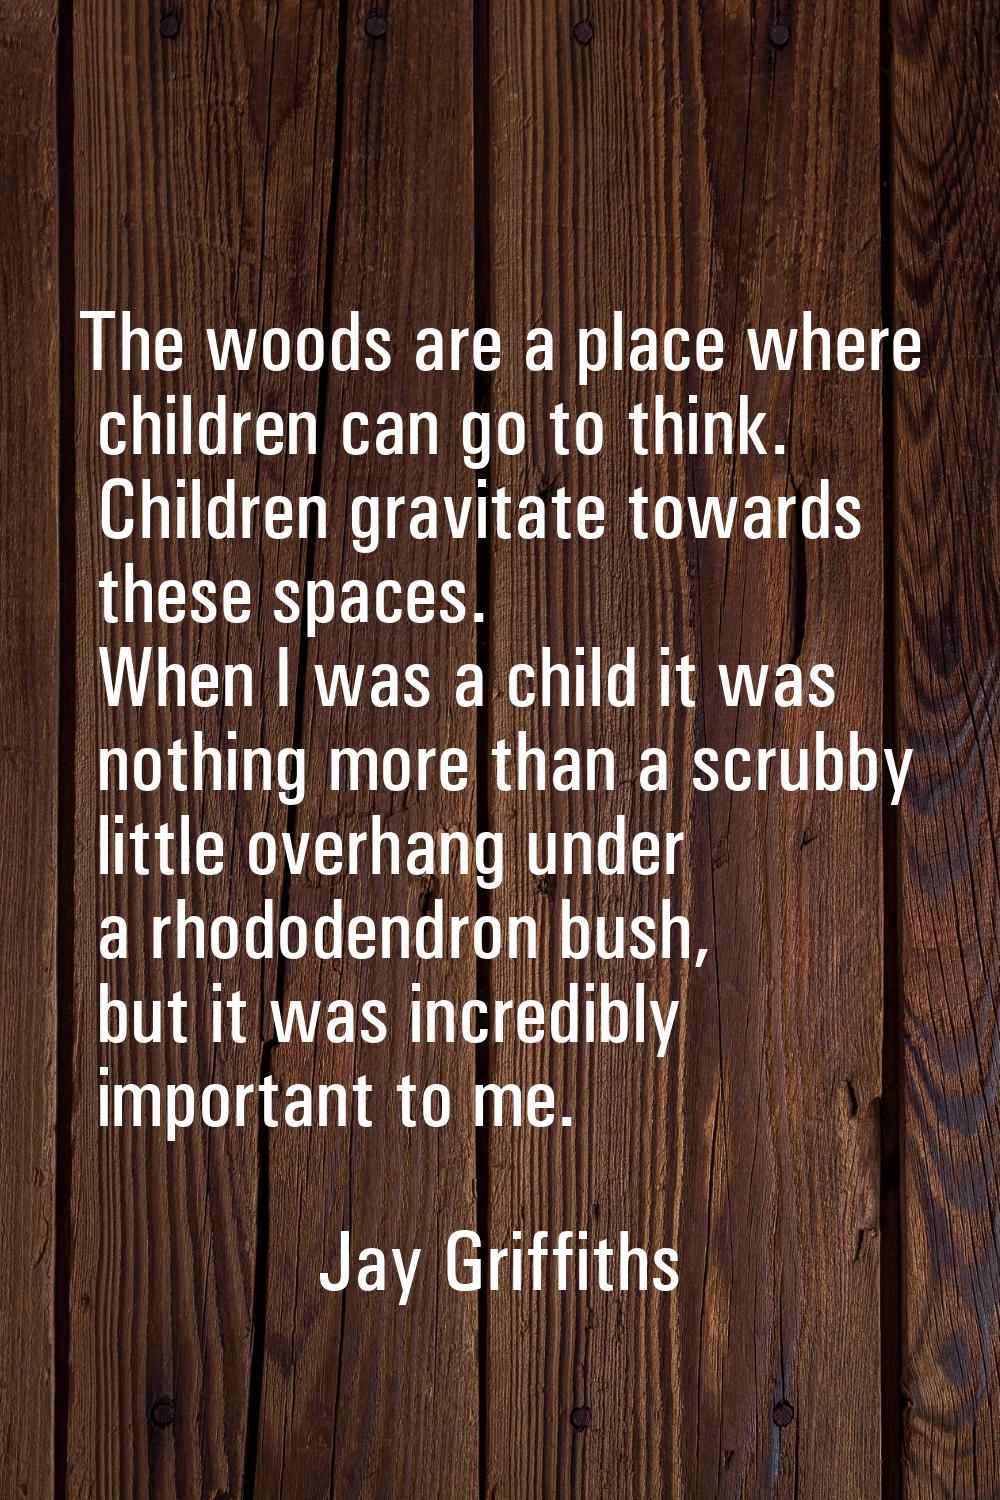 The woods are a place where children can go to think. Children gravitate towards these spaces. When